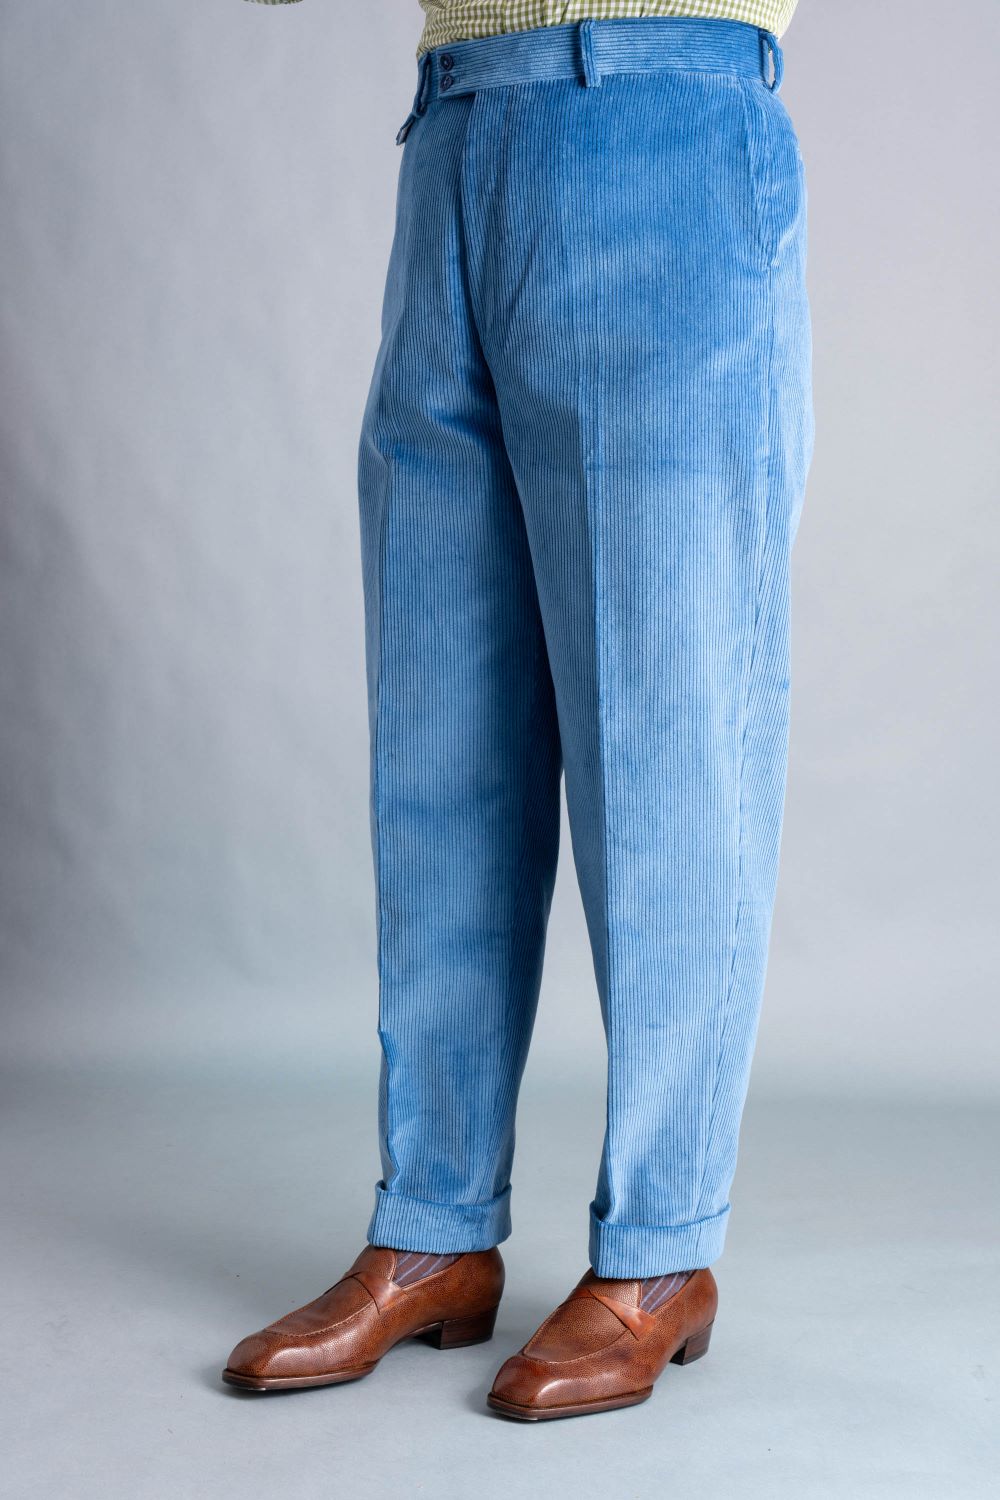 Stancliffe Corduroy Flat Front Trouser in Azure Blue - Sideview